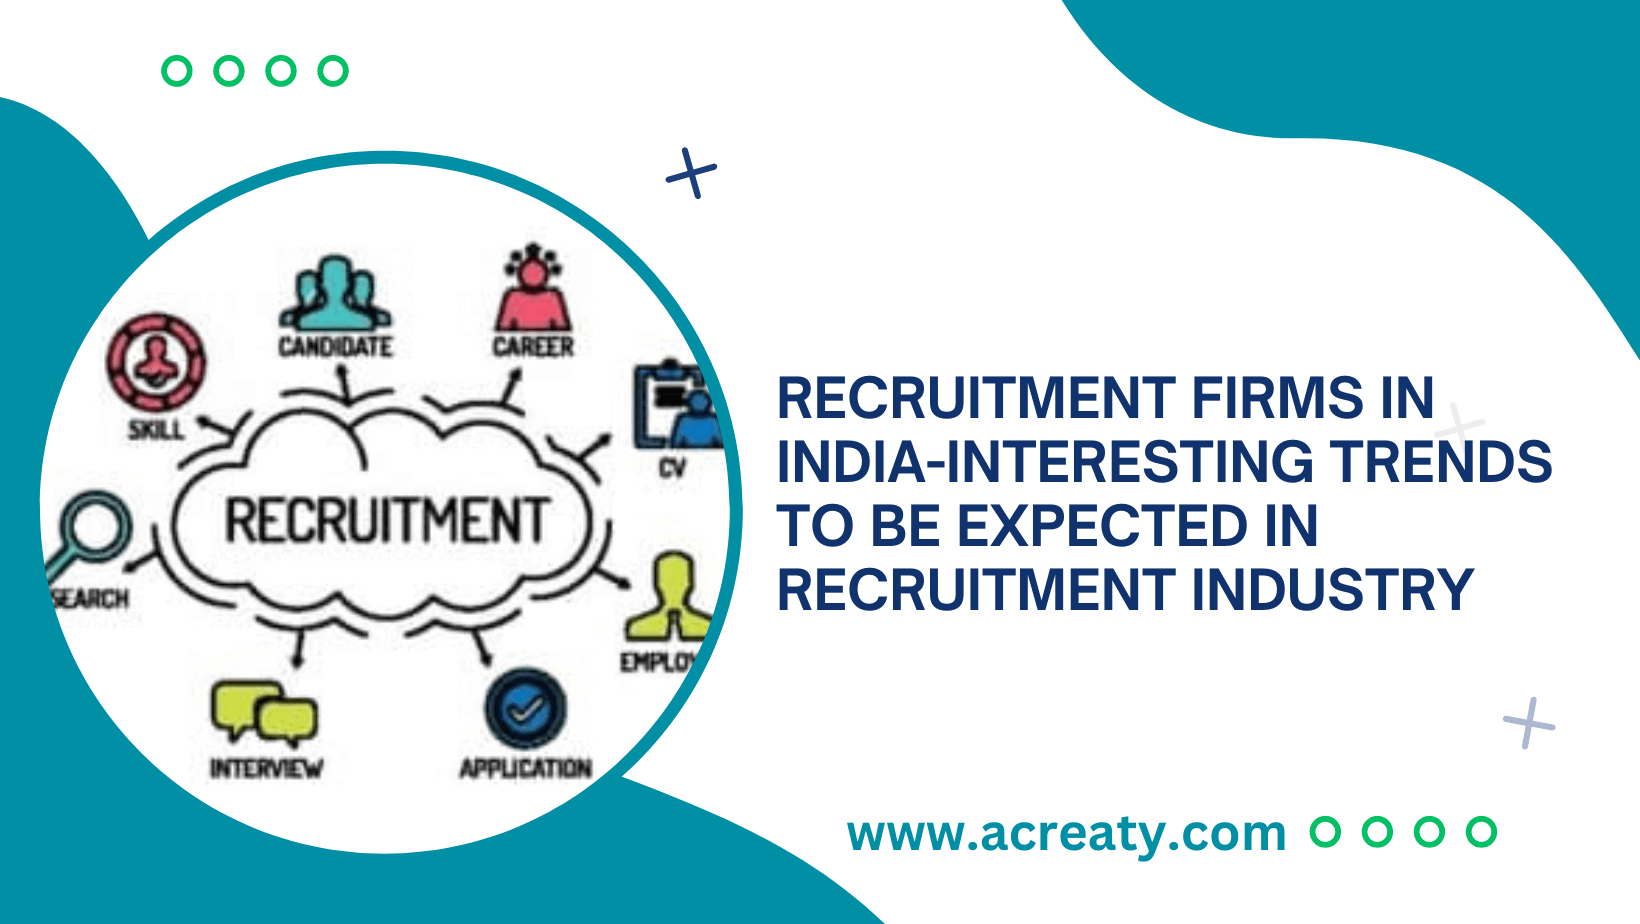  Recruitment Firms in India-Interesting Trends to be expected in Recruitment Industry